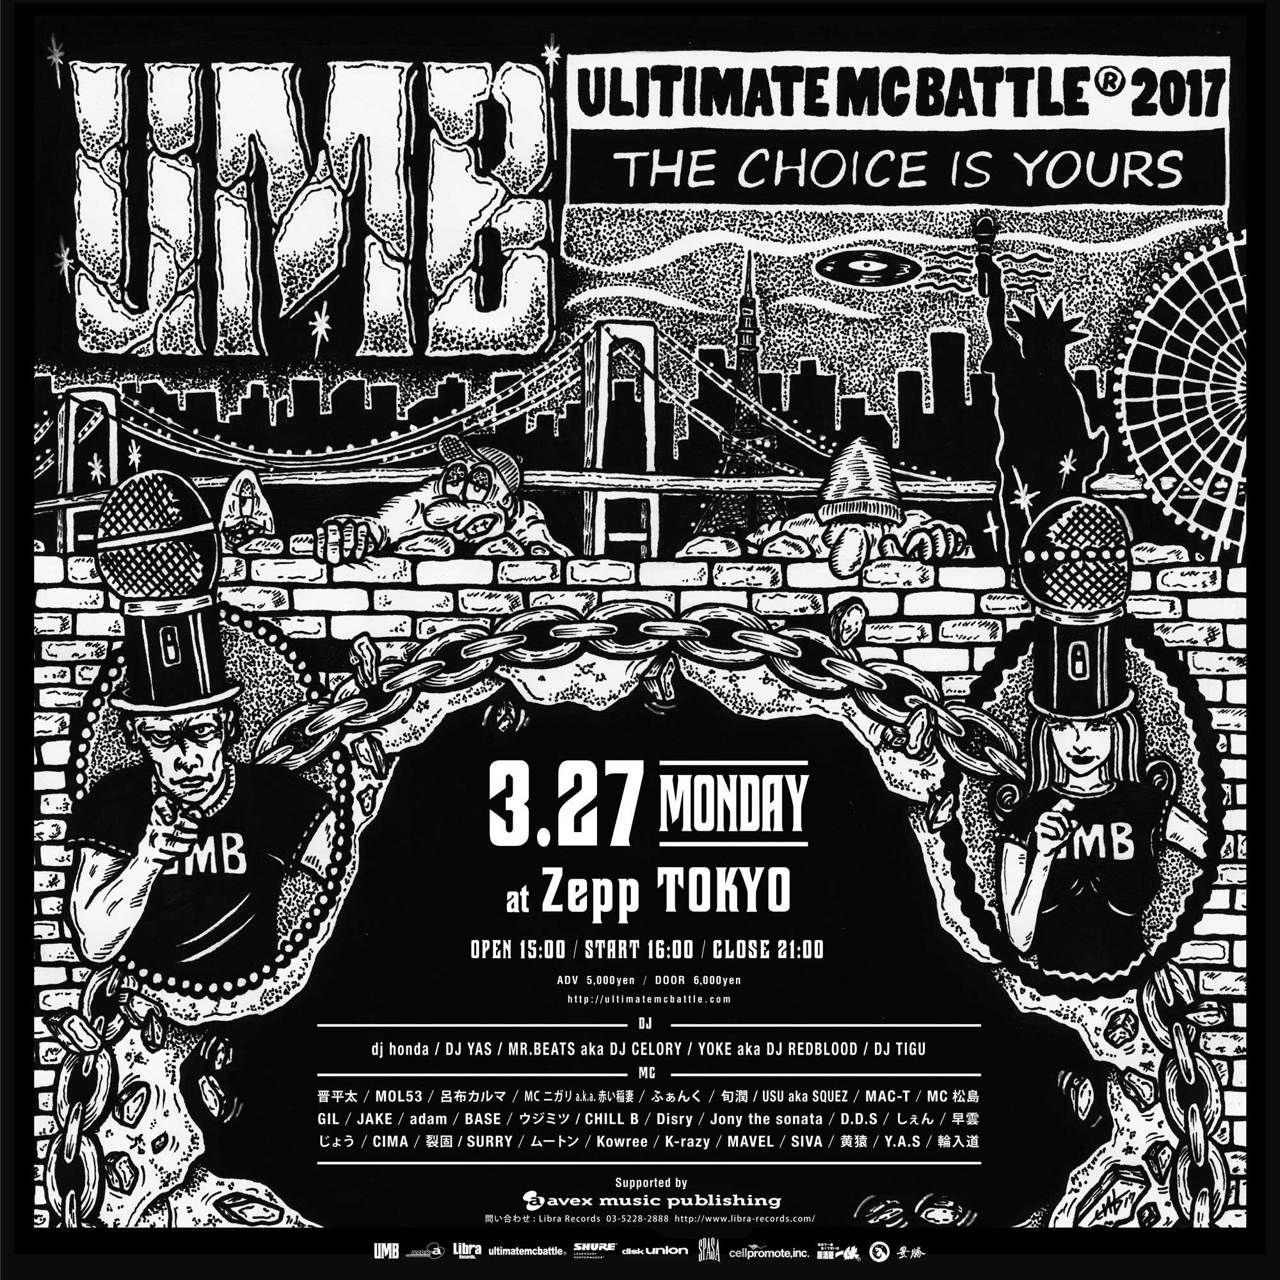 ULTIMATE MC BATTLE ® 2017 THE CHOICE IS YOURS Supported by avex music publishing @ZEPP TOKYO